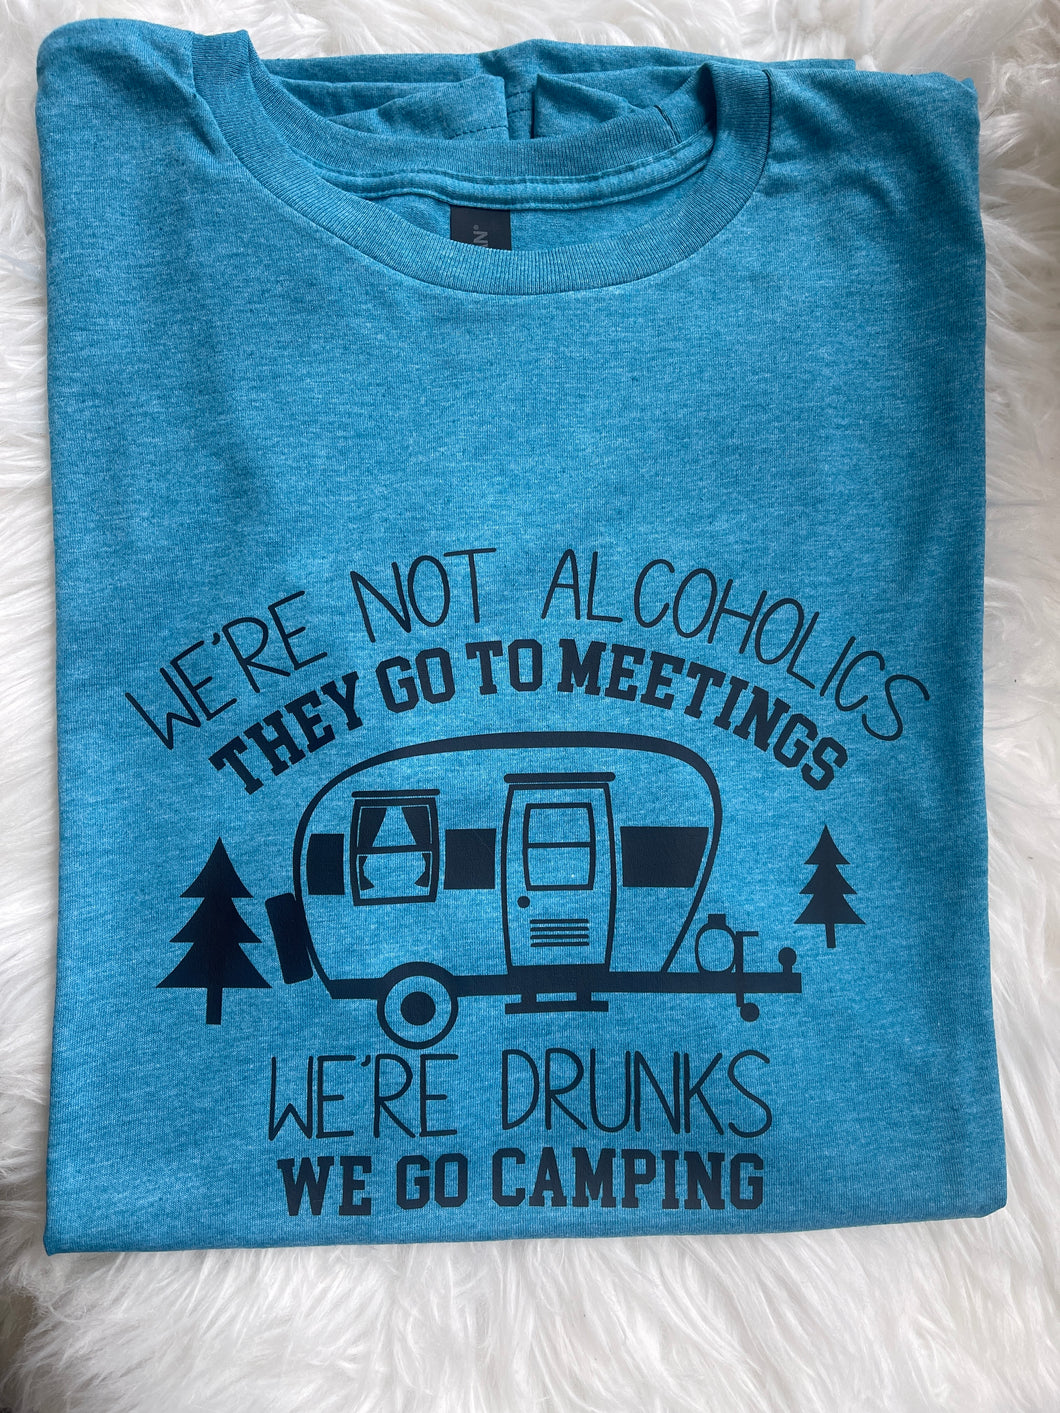 We’re not alcoholics, we’re drunks camping tee